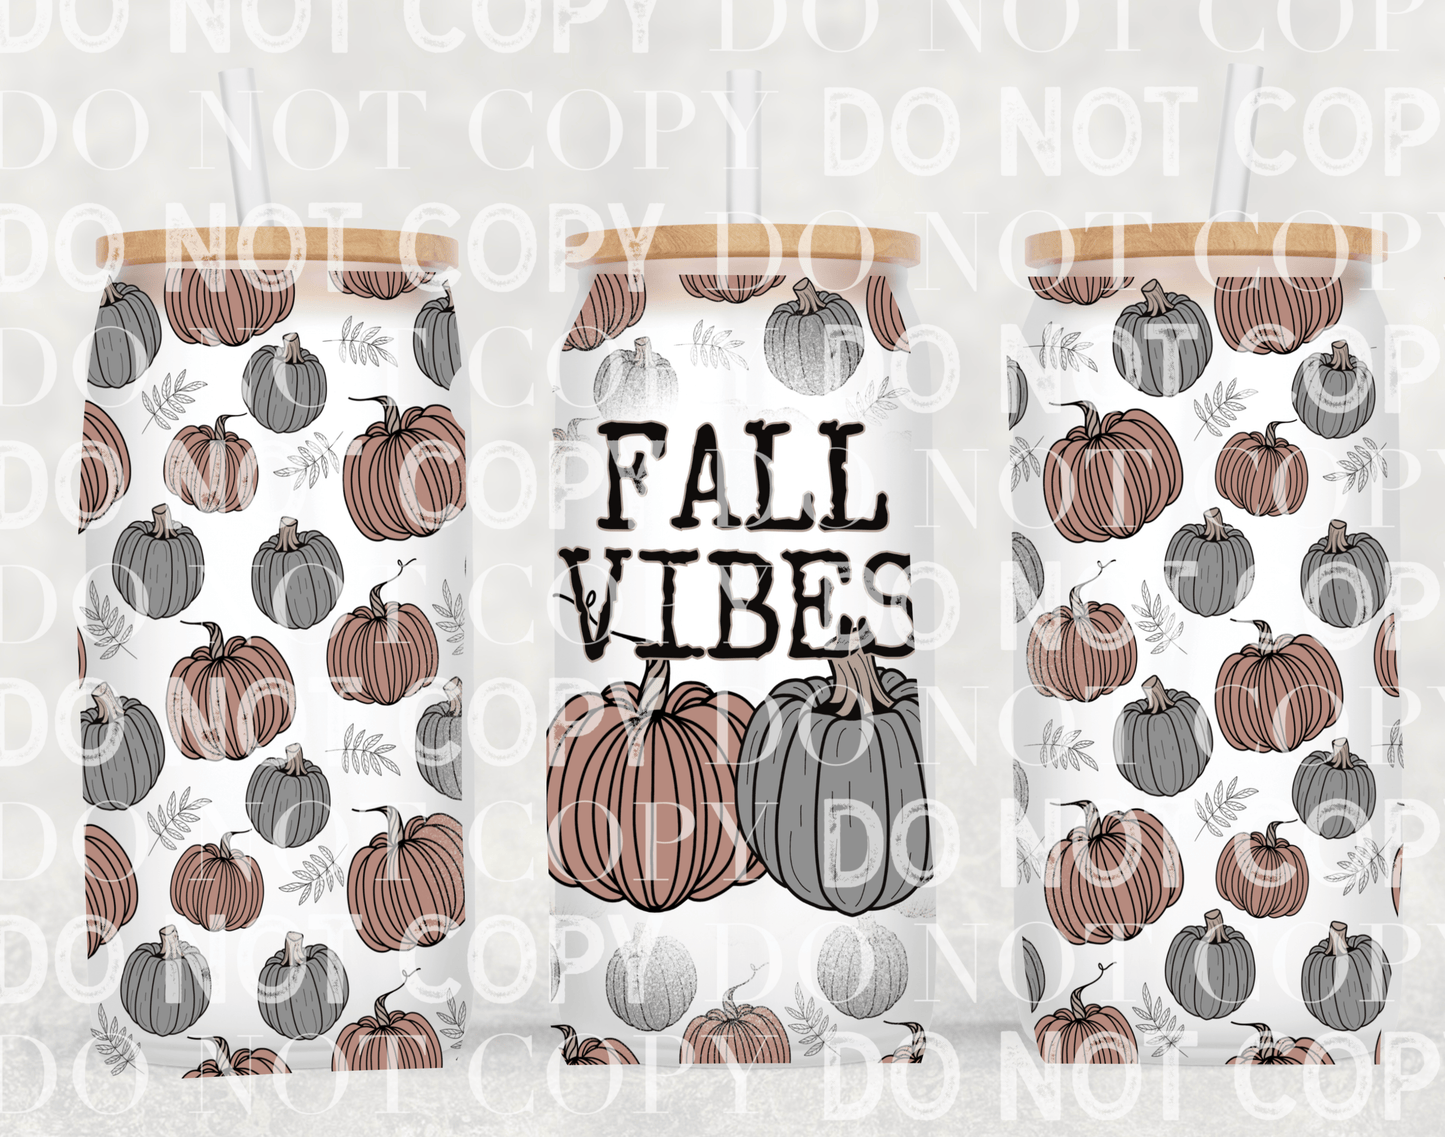 Fall vibes tumbler wrap sized for 16 oz frosted cup from mother tumbler  Cerra's Shop Creates   